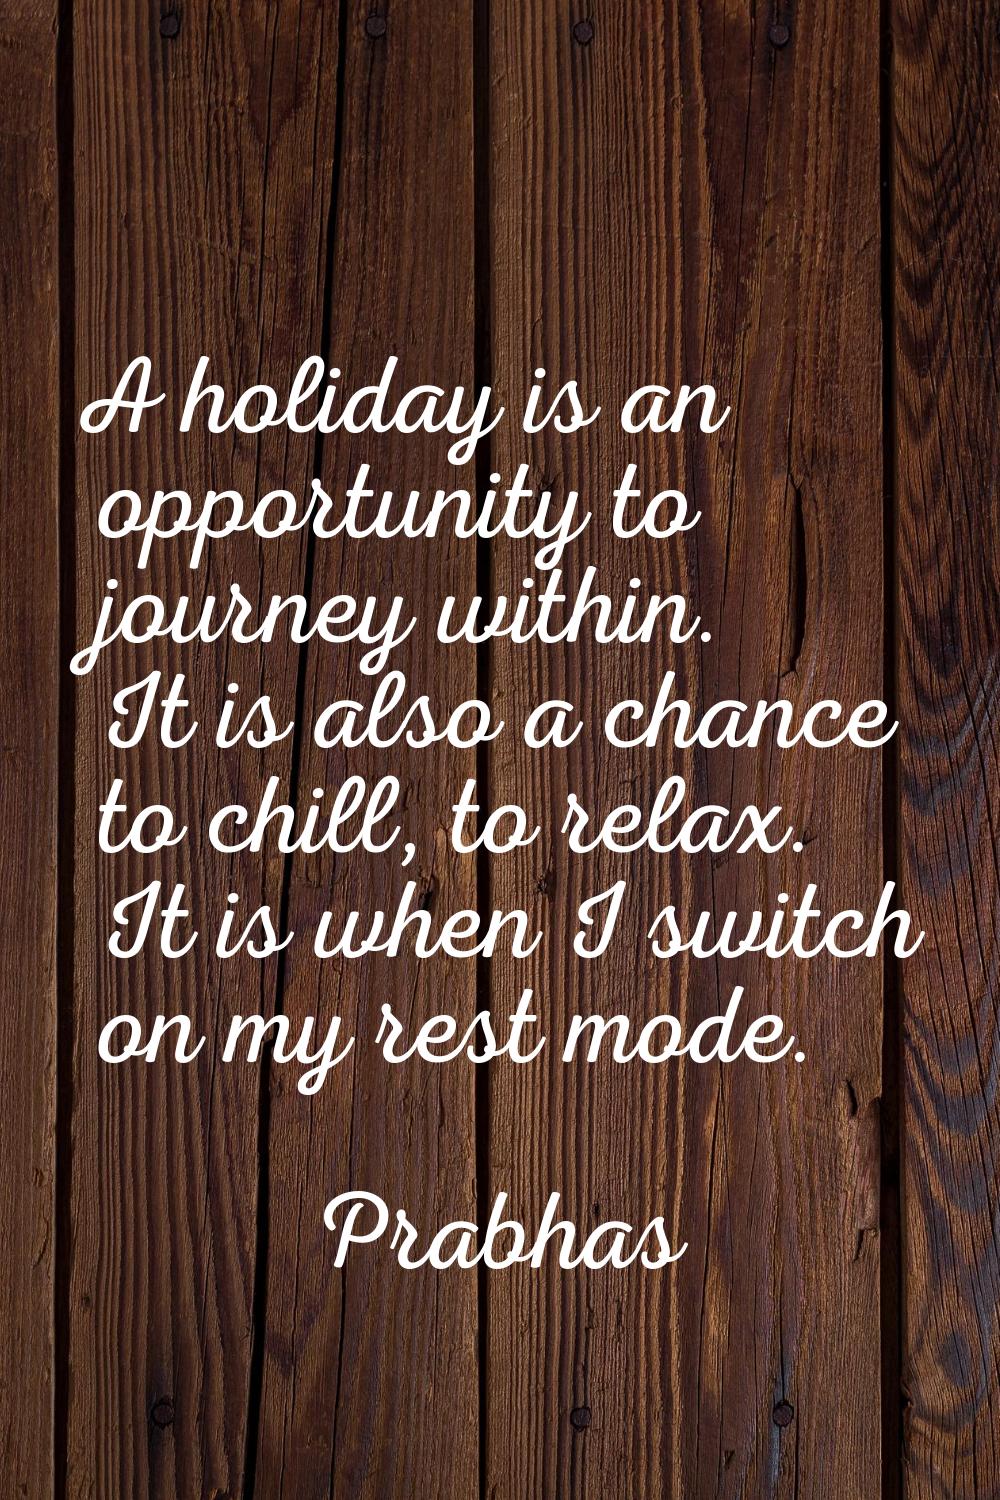 A holiday is an opportunity to journey within. It is also a chance to chill, to relax. It is when I